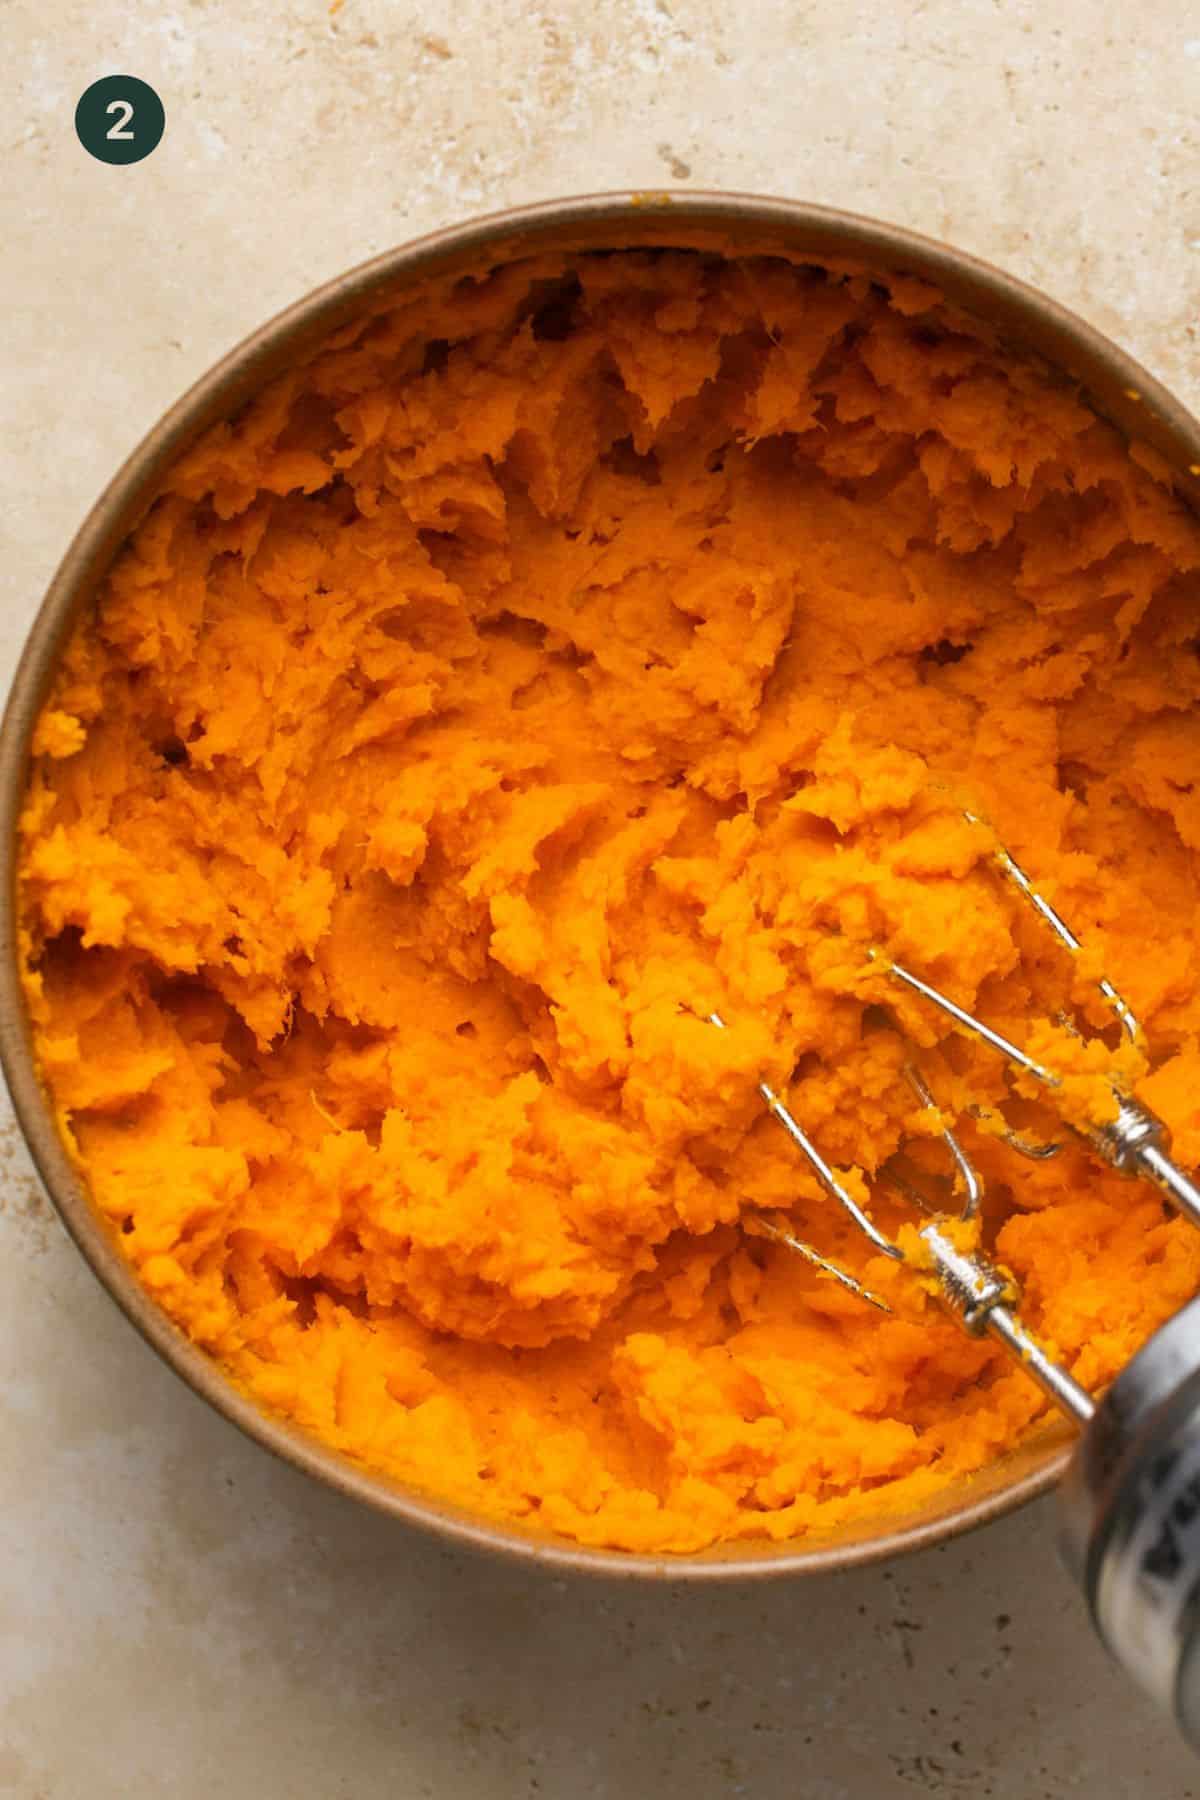 Mashed sweet potatoes using a hand mixer in a bowl.